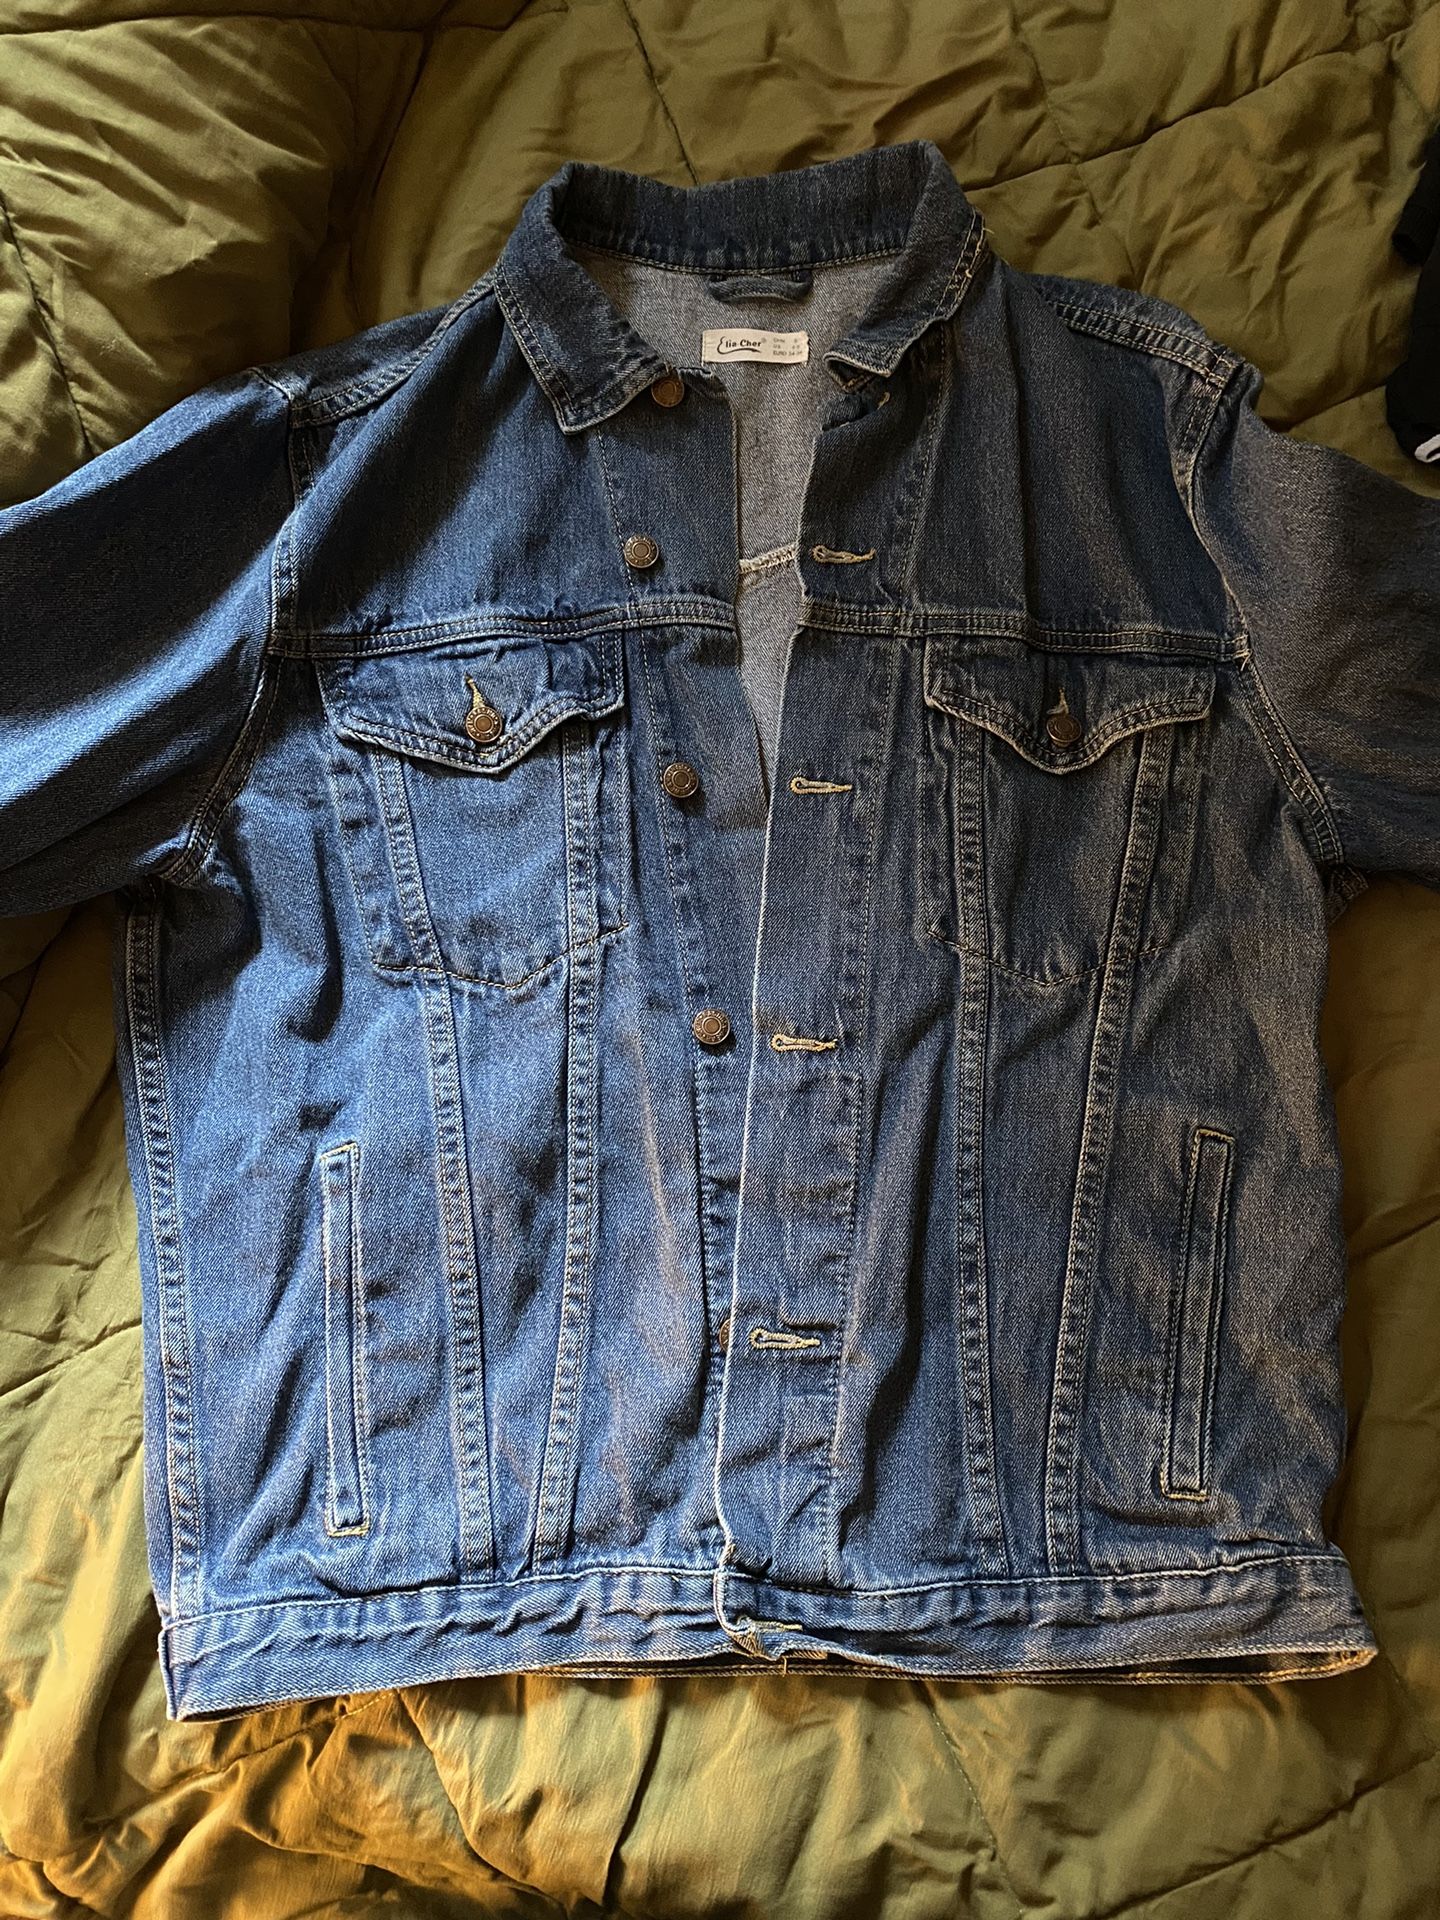 Denim Jacket Paired With Jeans 